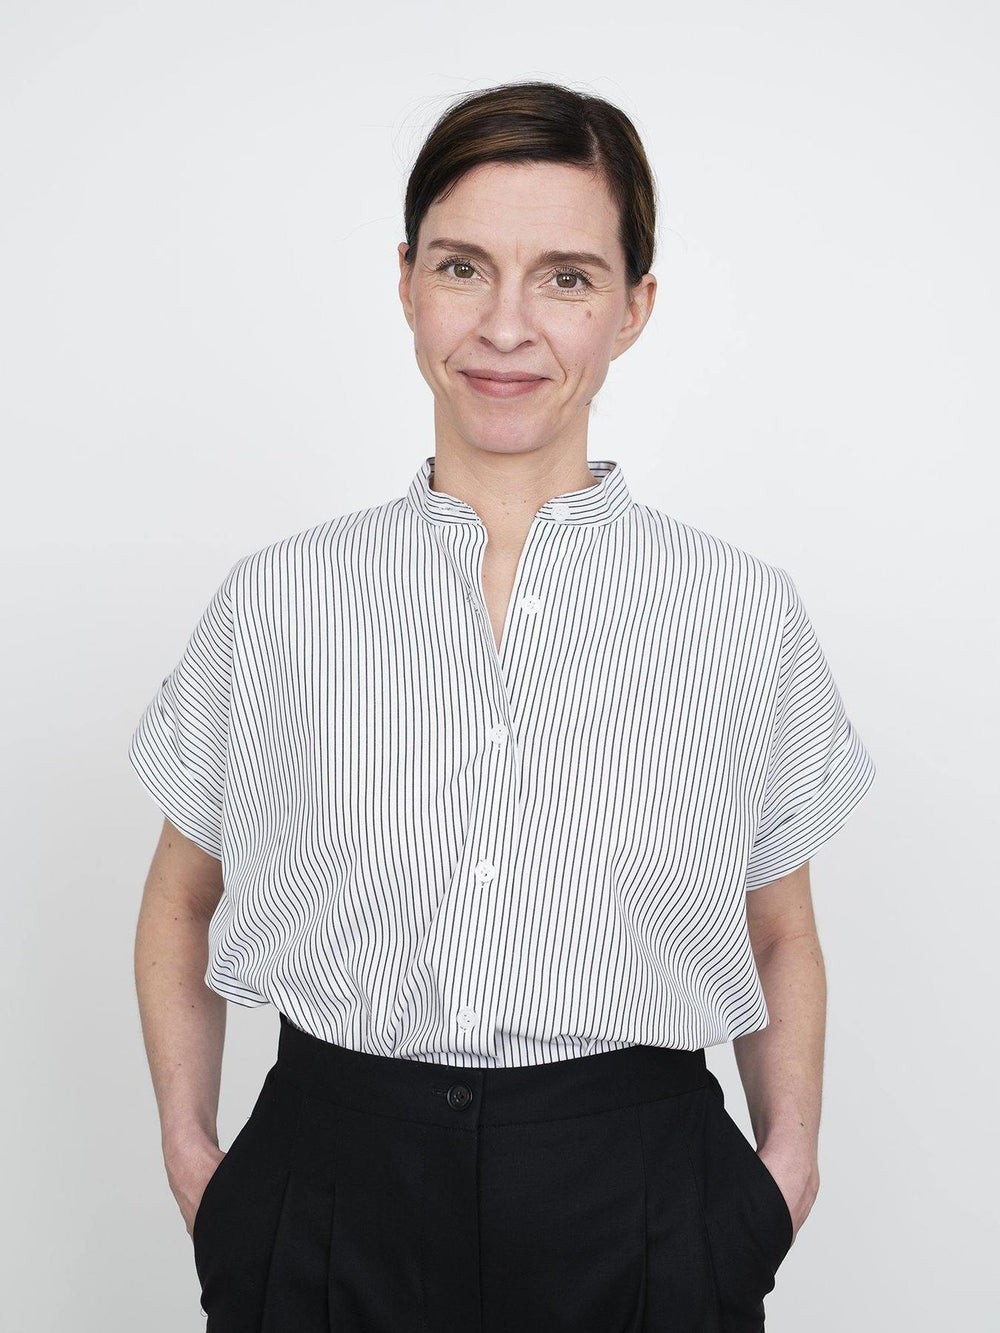 Woman wearing the Cap Sleeve Shirt sewing pattern from The Assembly Line on The Fold Line. A shirt pattern made in light to medium weight fabrics such as cotton shirting, featuring a boxy silhouette, stand collar, cap sleeves with turn back cuff and front